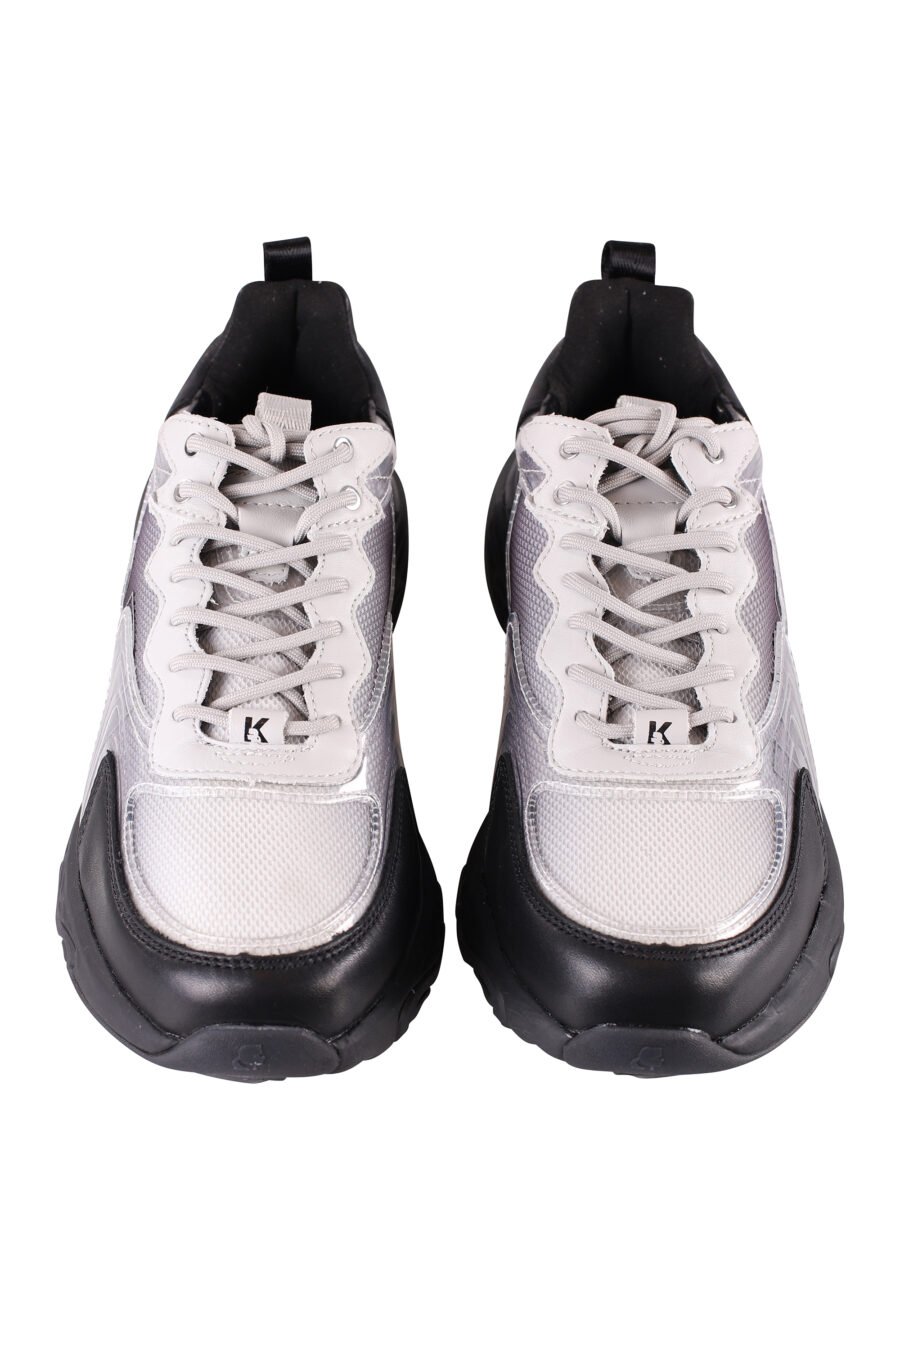 Black "blaze" trainers with white and transparent details - IMG 8500